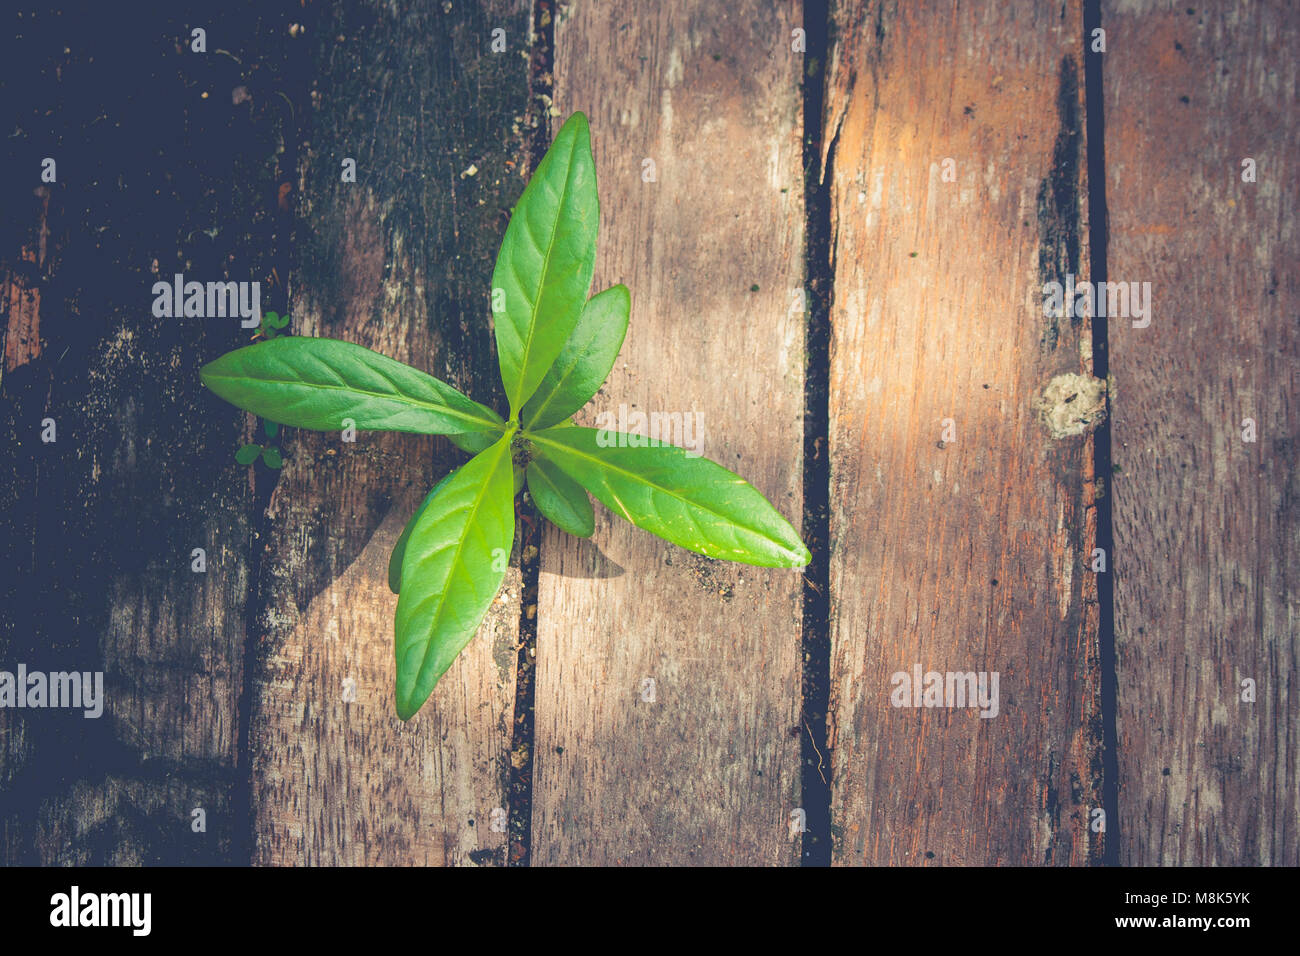 New life and idea concept : Green sprout tree growing through from old timber in vintage style. Stock Photo